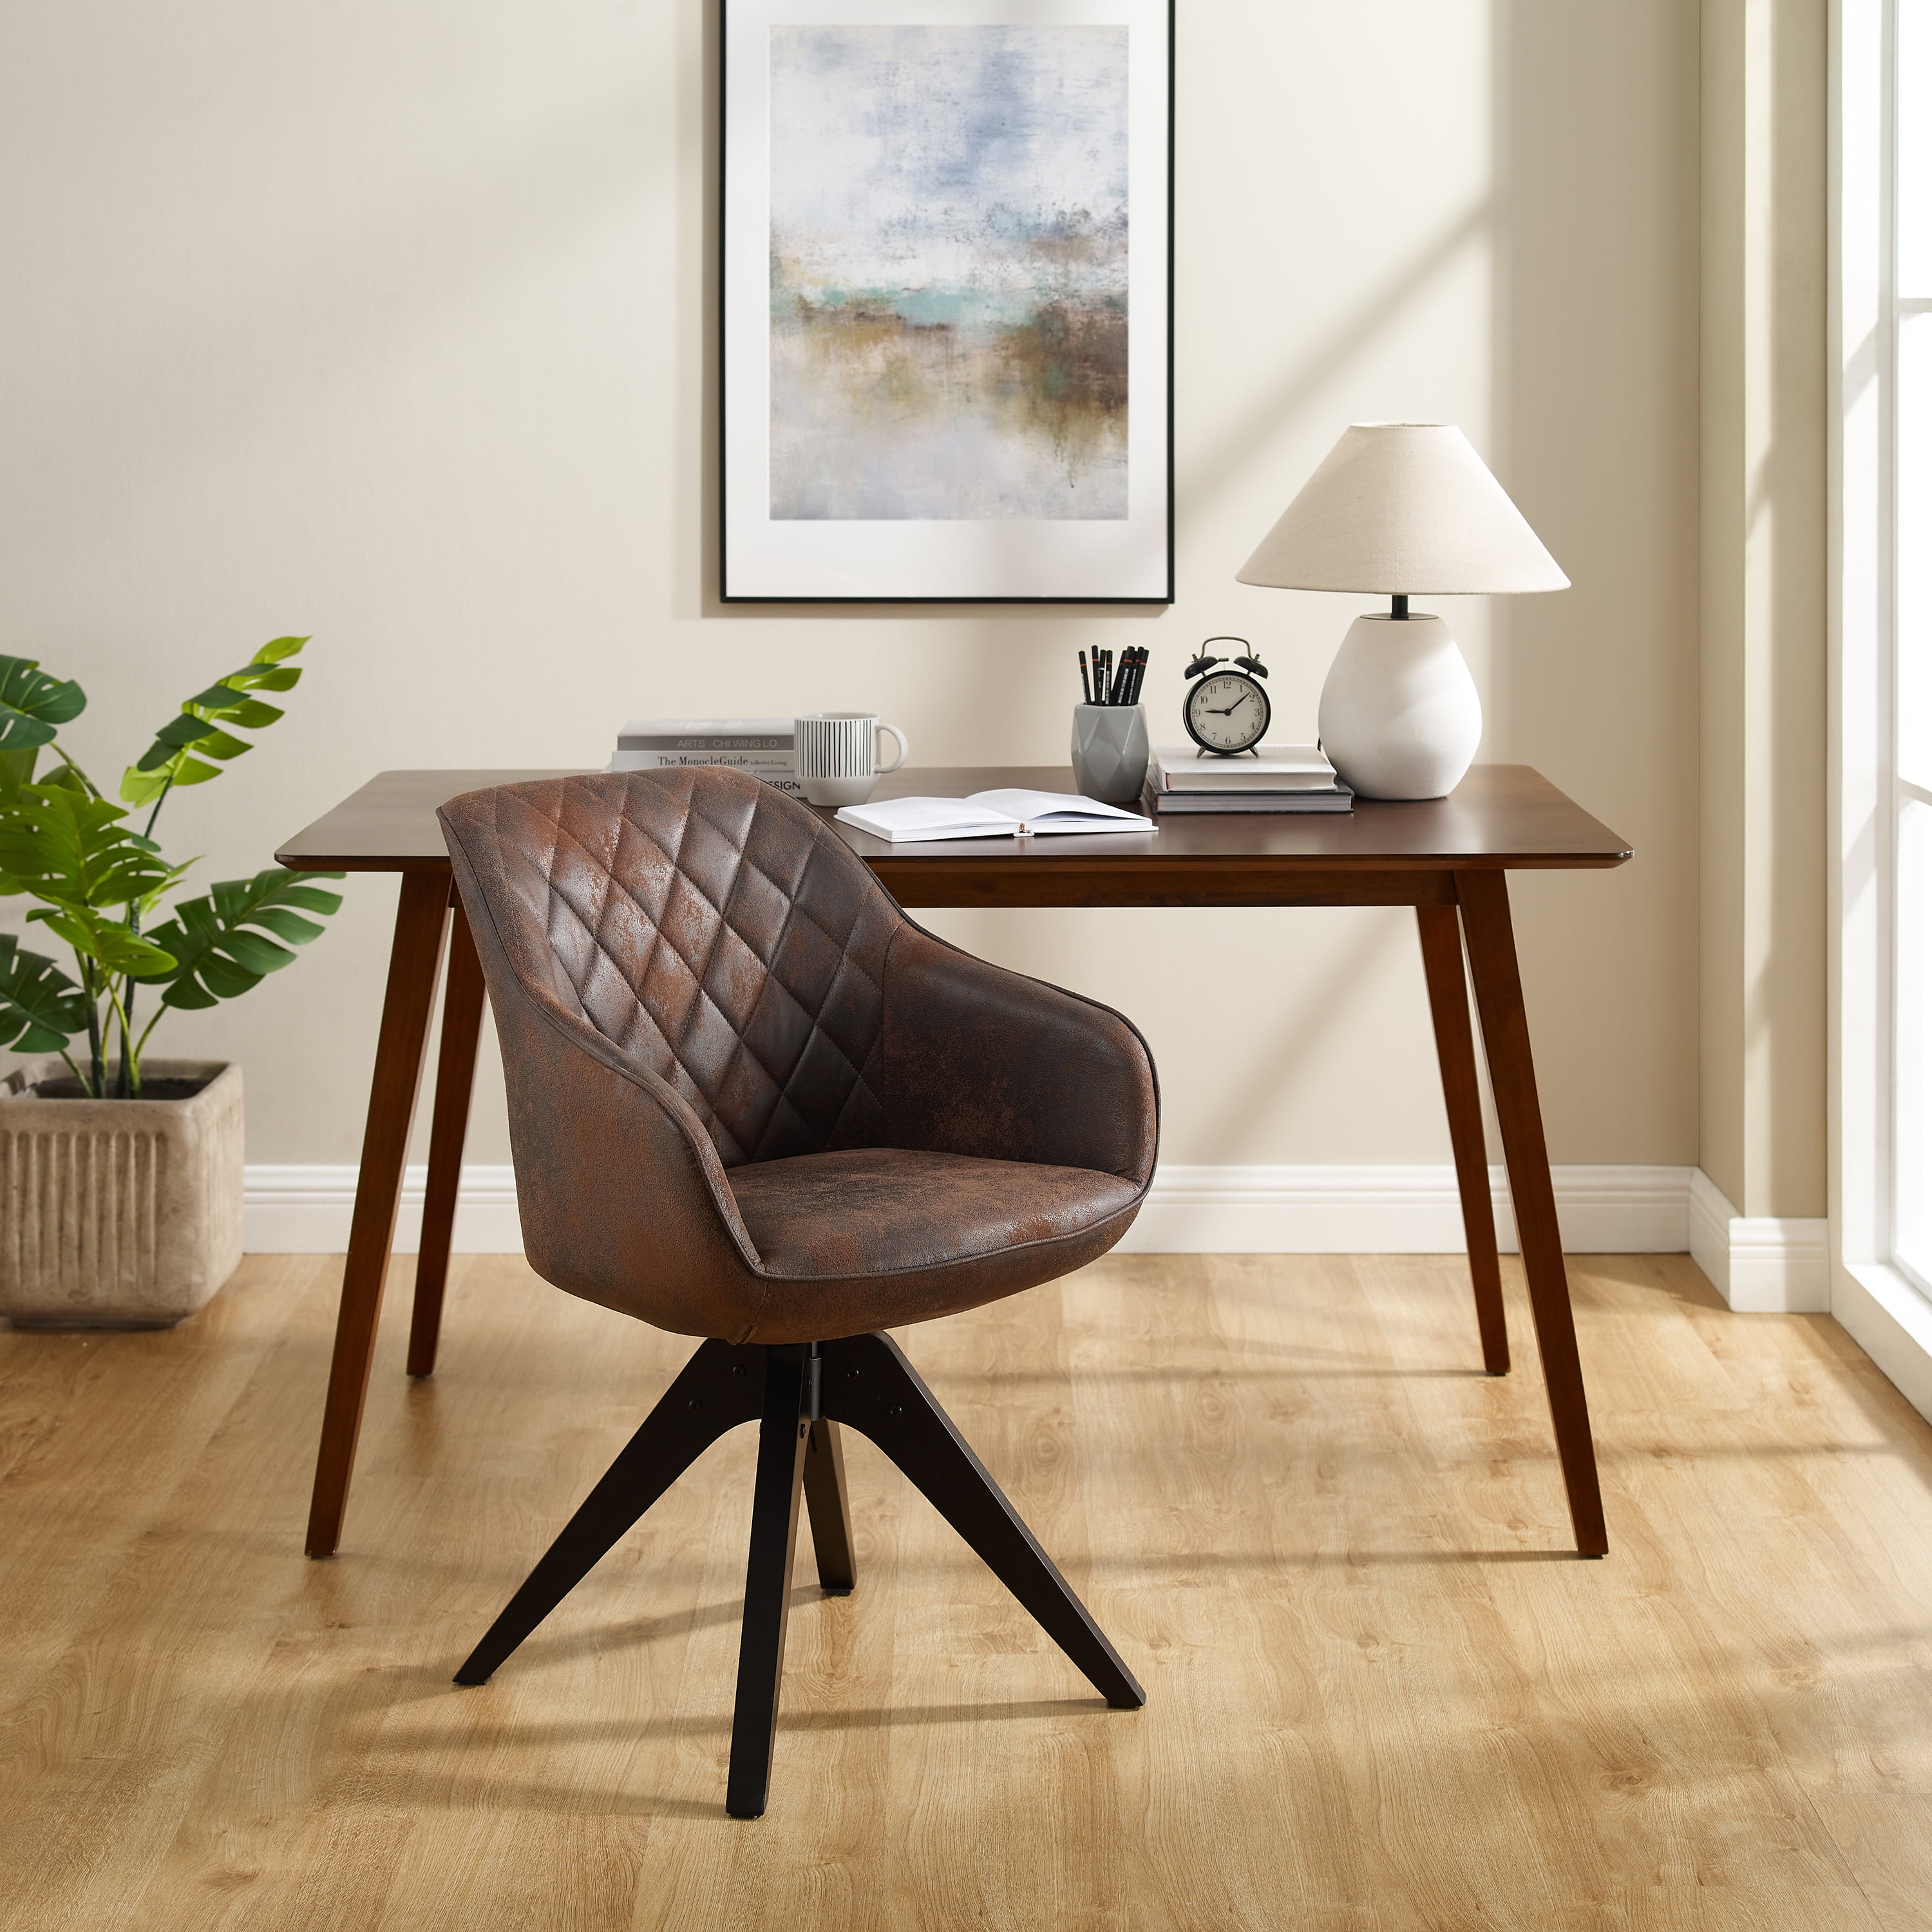 Art Leon Desk Chair No Wheels, with Foot Rest Ottoman and Lumbar Pillow,  Mid Century Modern Chair, Adjustable Height Swivel Accent Chair for Living